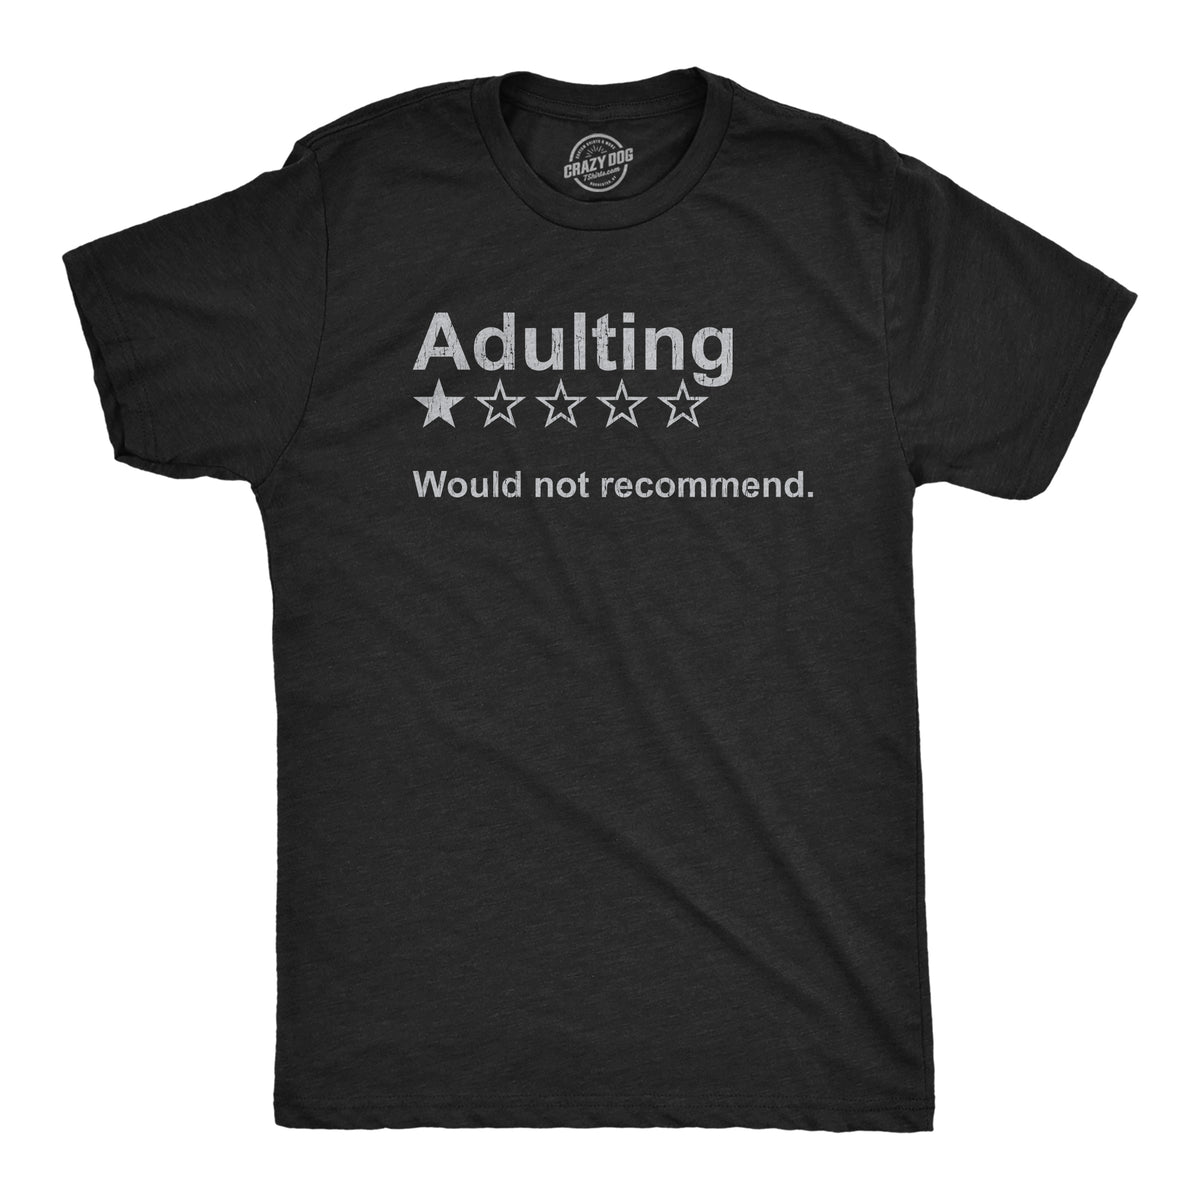 Funny Heather Black Adulting Would Not Recommend Mens T Shirt Nerdy Nerdy Sarcastic Tee